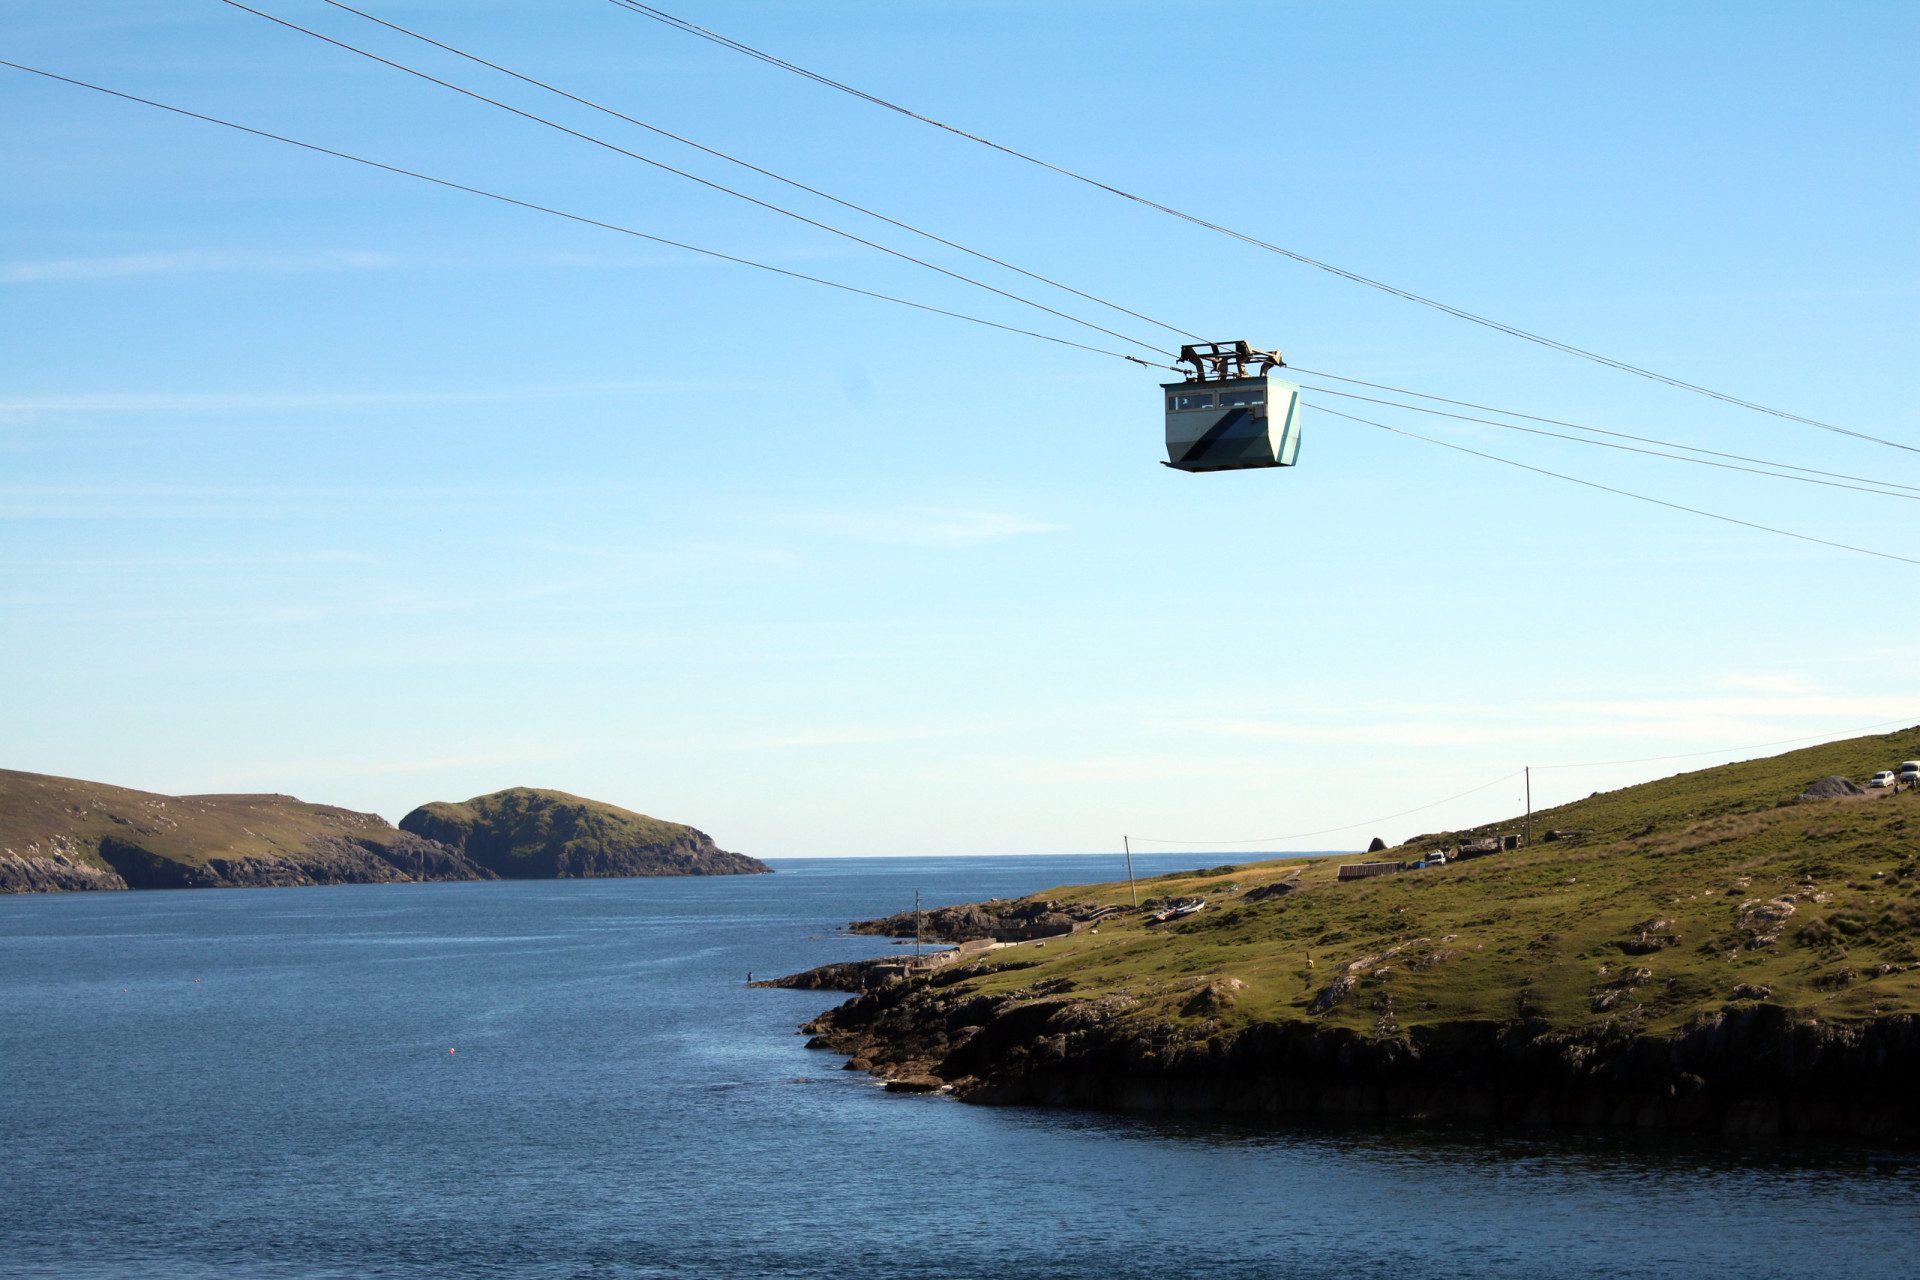 <p>The island lies in a narrow sound that's reachable by cable car, the only one in Ireland. The journey takes only 10 minutes.</p><p>You may also like:<a href="https://www.starsinsider.com/n/299852?utm_source=msn.com&utm_medium=display&utm_campaign=referral_description&utm_content=621106en-au"> The most unusual places that people call home</a></p>